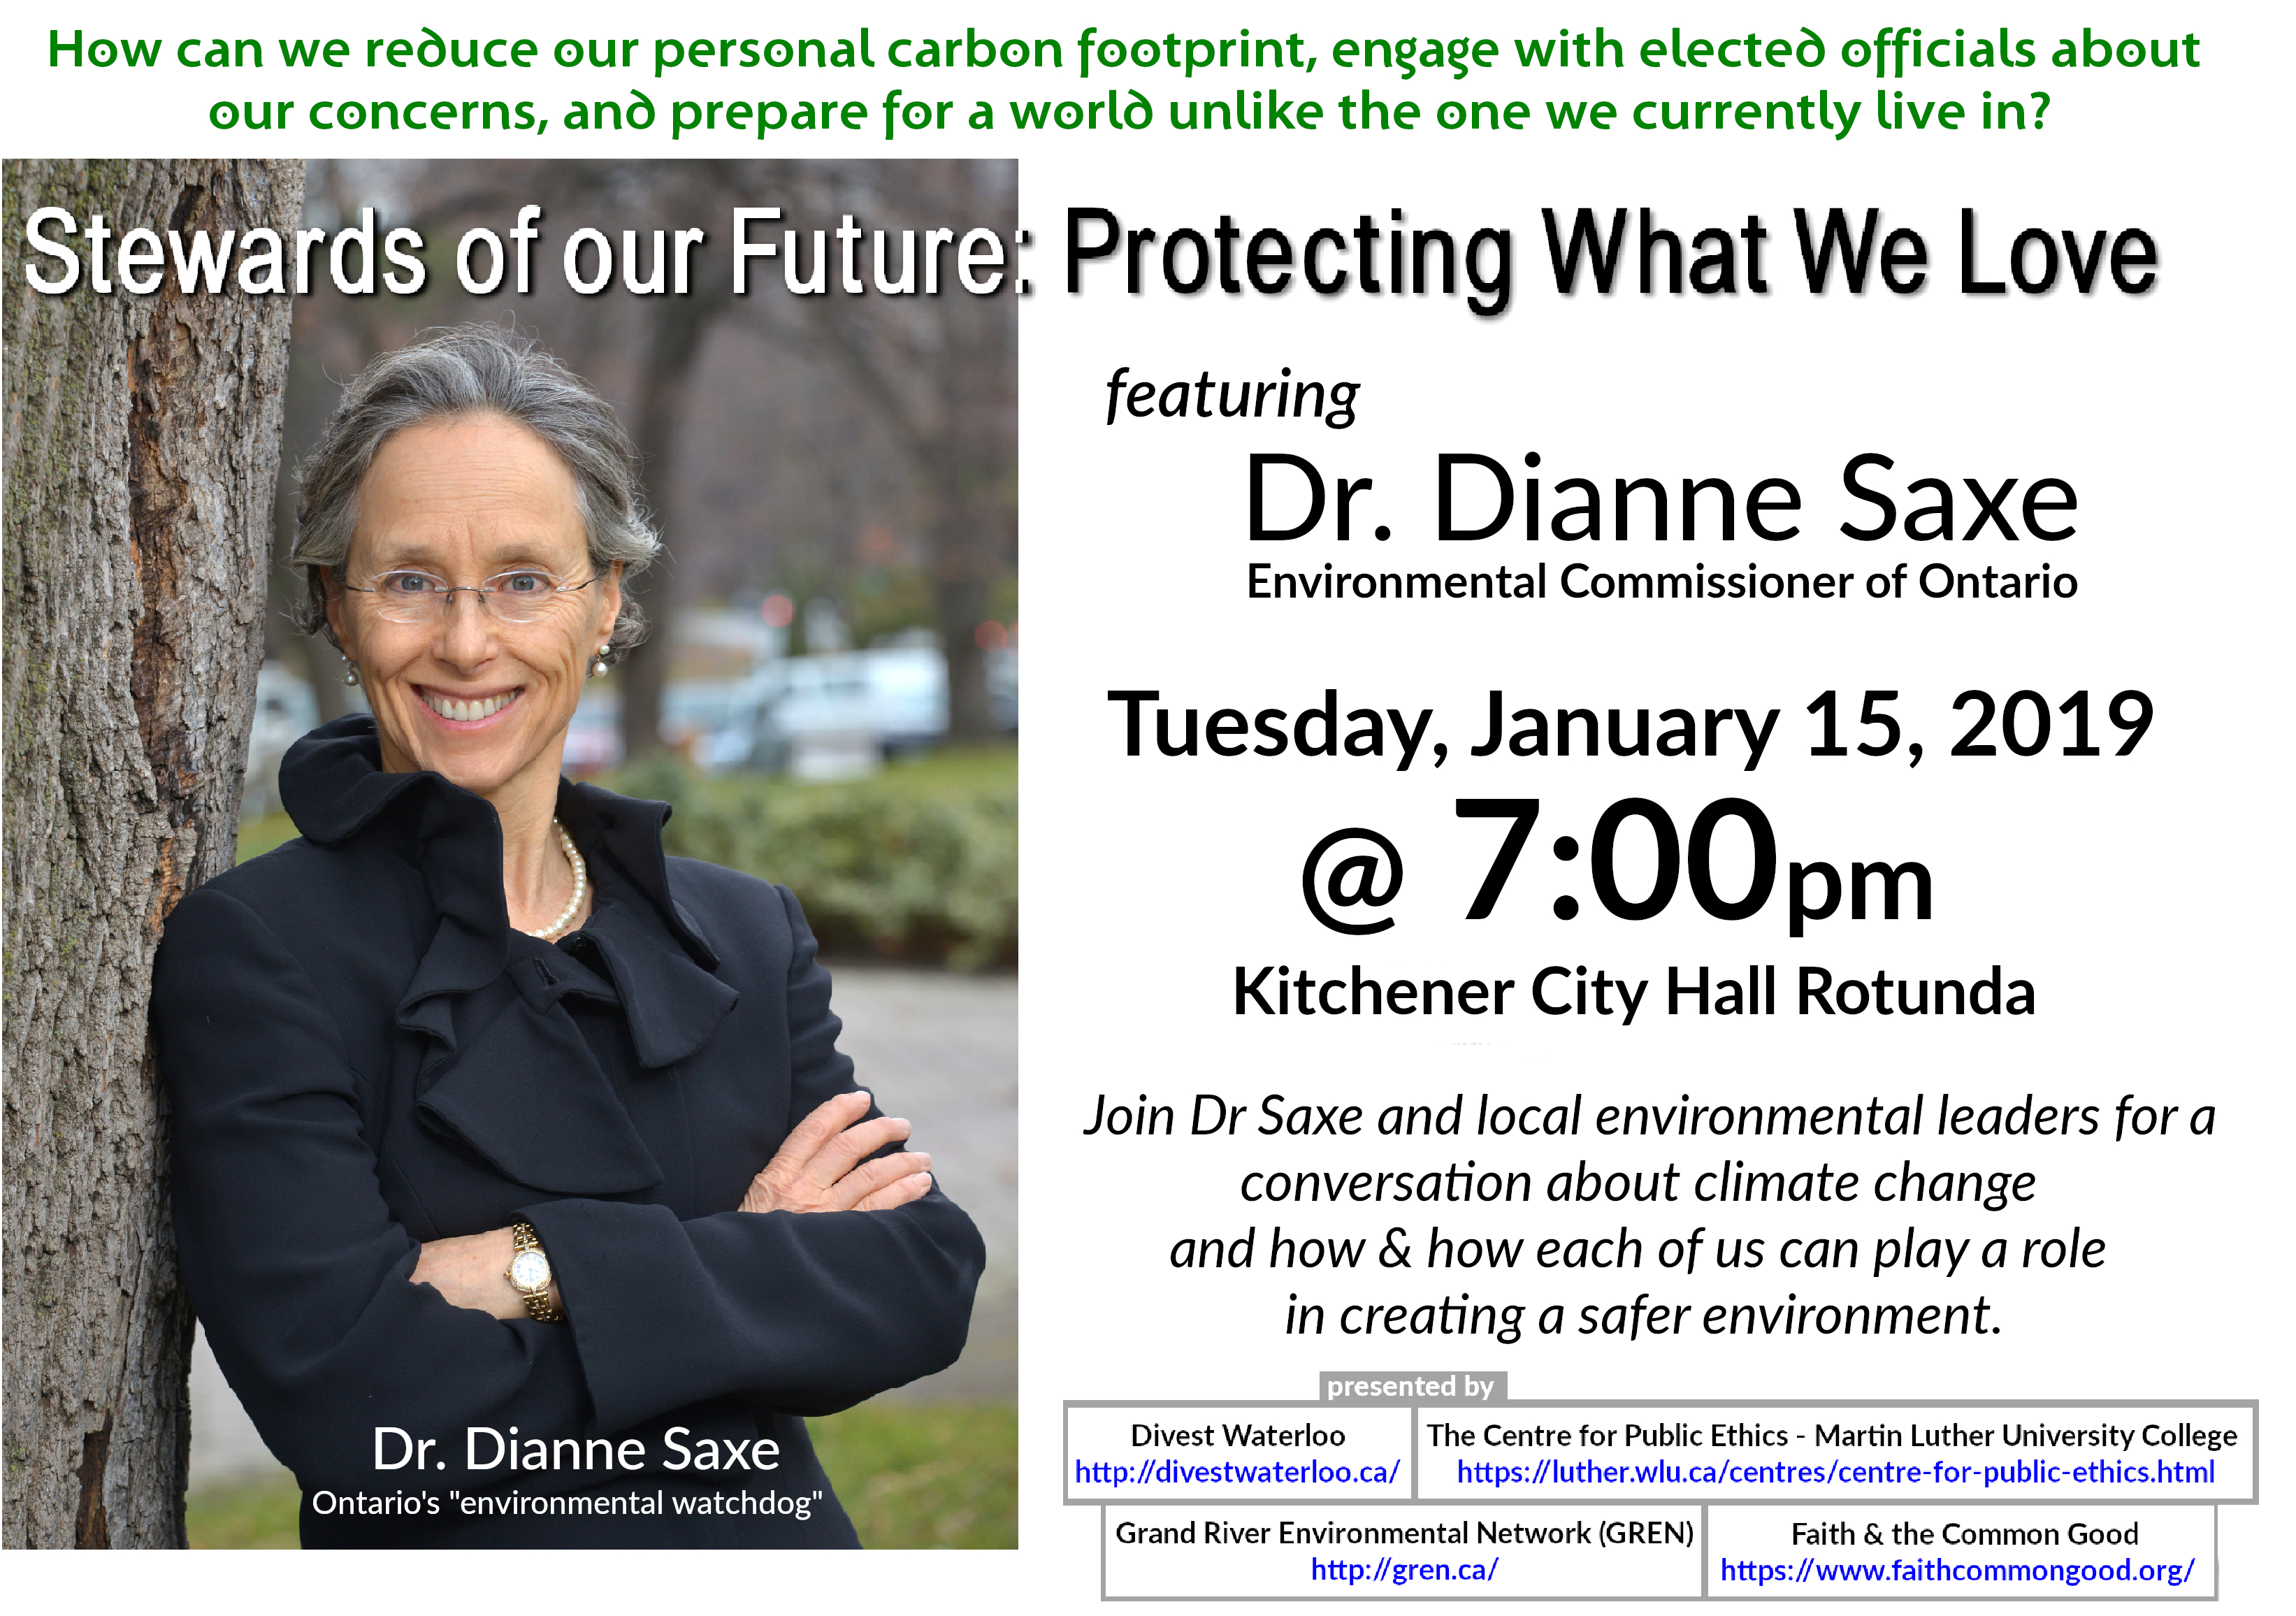 Poster: How can we reduce our personal carbon footprint, engage with elected officials about our concerns, and prepare for a world unlike the one we currently live in? Event Title: Stewards of Our Future: Protecting What We Love featuring Dianne Saxe, Environmental Commissioner of Ontario Tuesday January 15, 2019 7:00pm at Kitchener City Hall Rotunda Join Dr Saxe and local environmental leaders for a conversation about climate change and how each of us can play a role in creating a safer environment. Presented by Divest Waterloo http://divestwaterloo.ca/ The Centre for Public Ethics - Martin Luther University College https://luther.wlu.ca/centres/centre-for-public-ethics.html Grand River Environmental Network (GREN) http://gren.ca/ Faith & the Common Good https://www.faithcommongood.org/